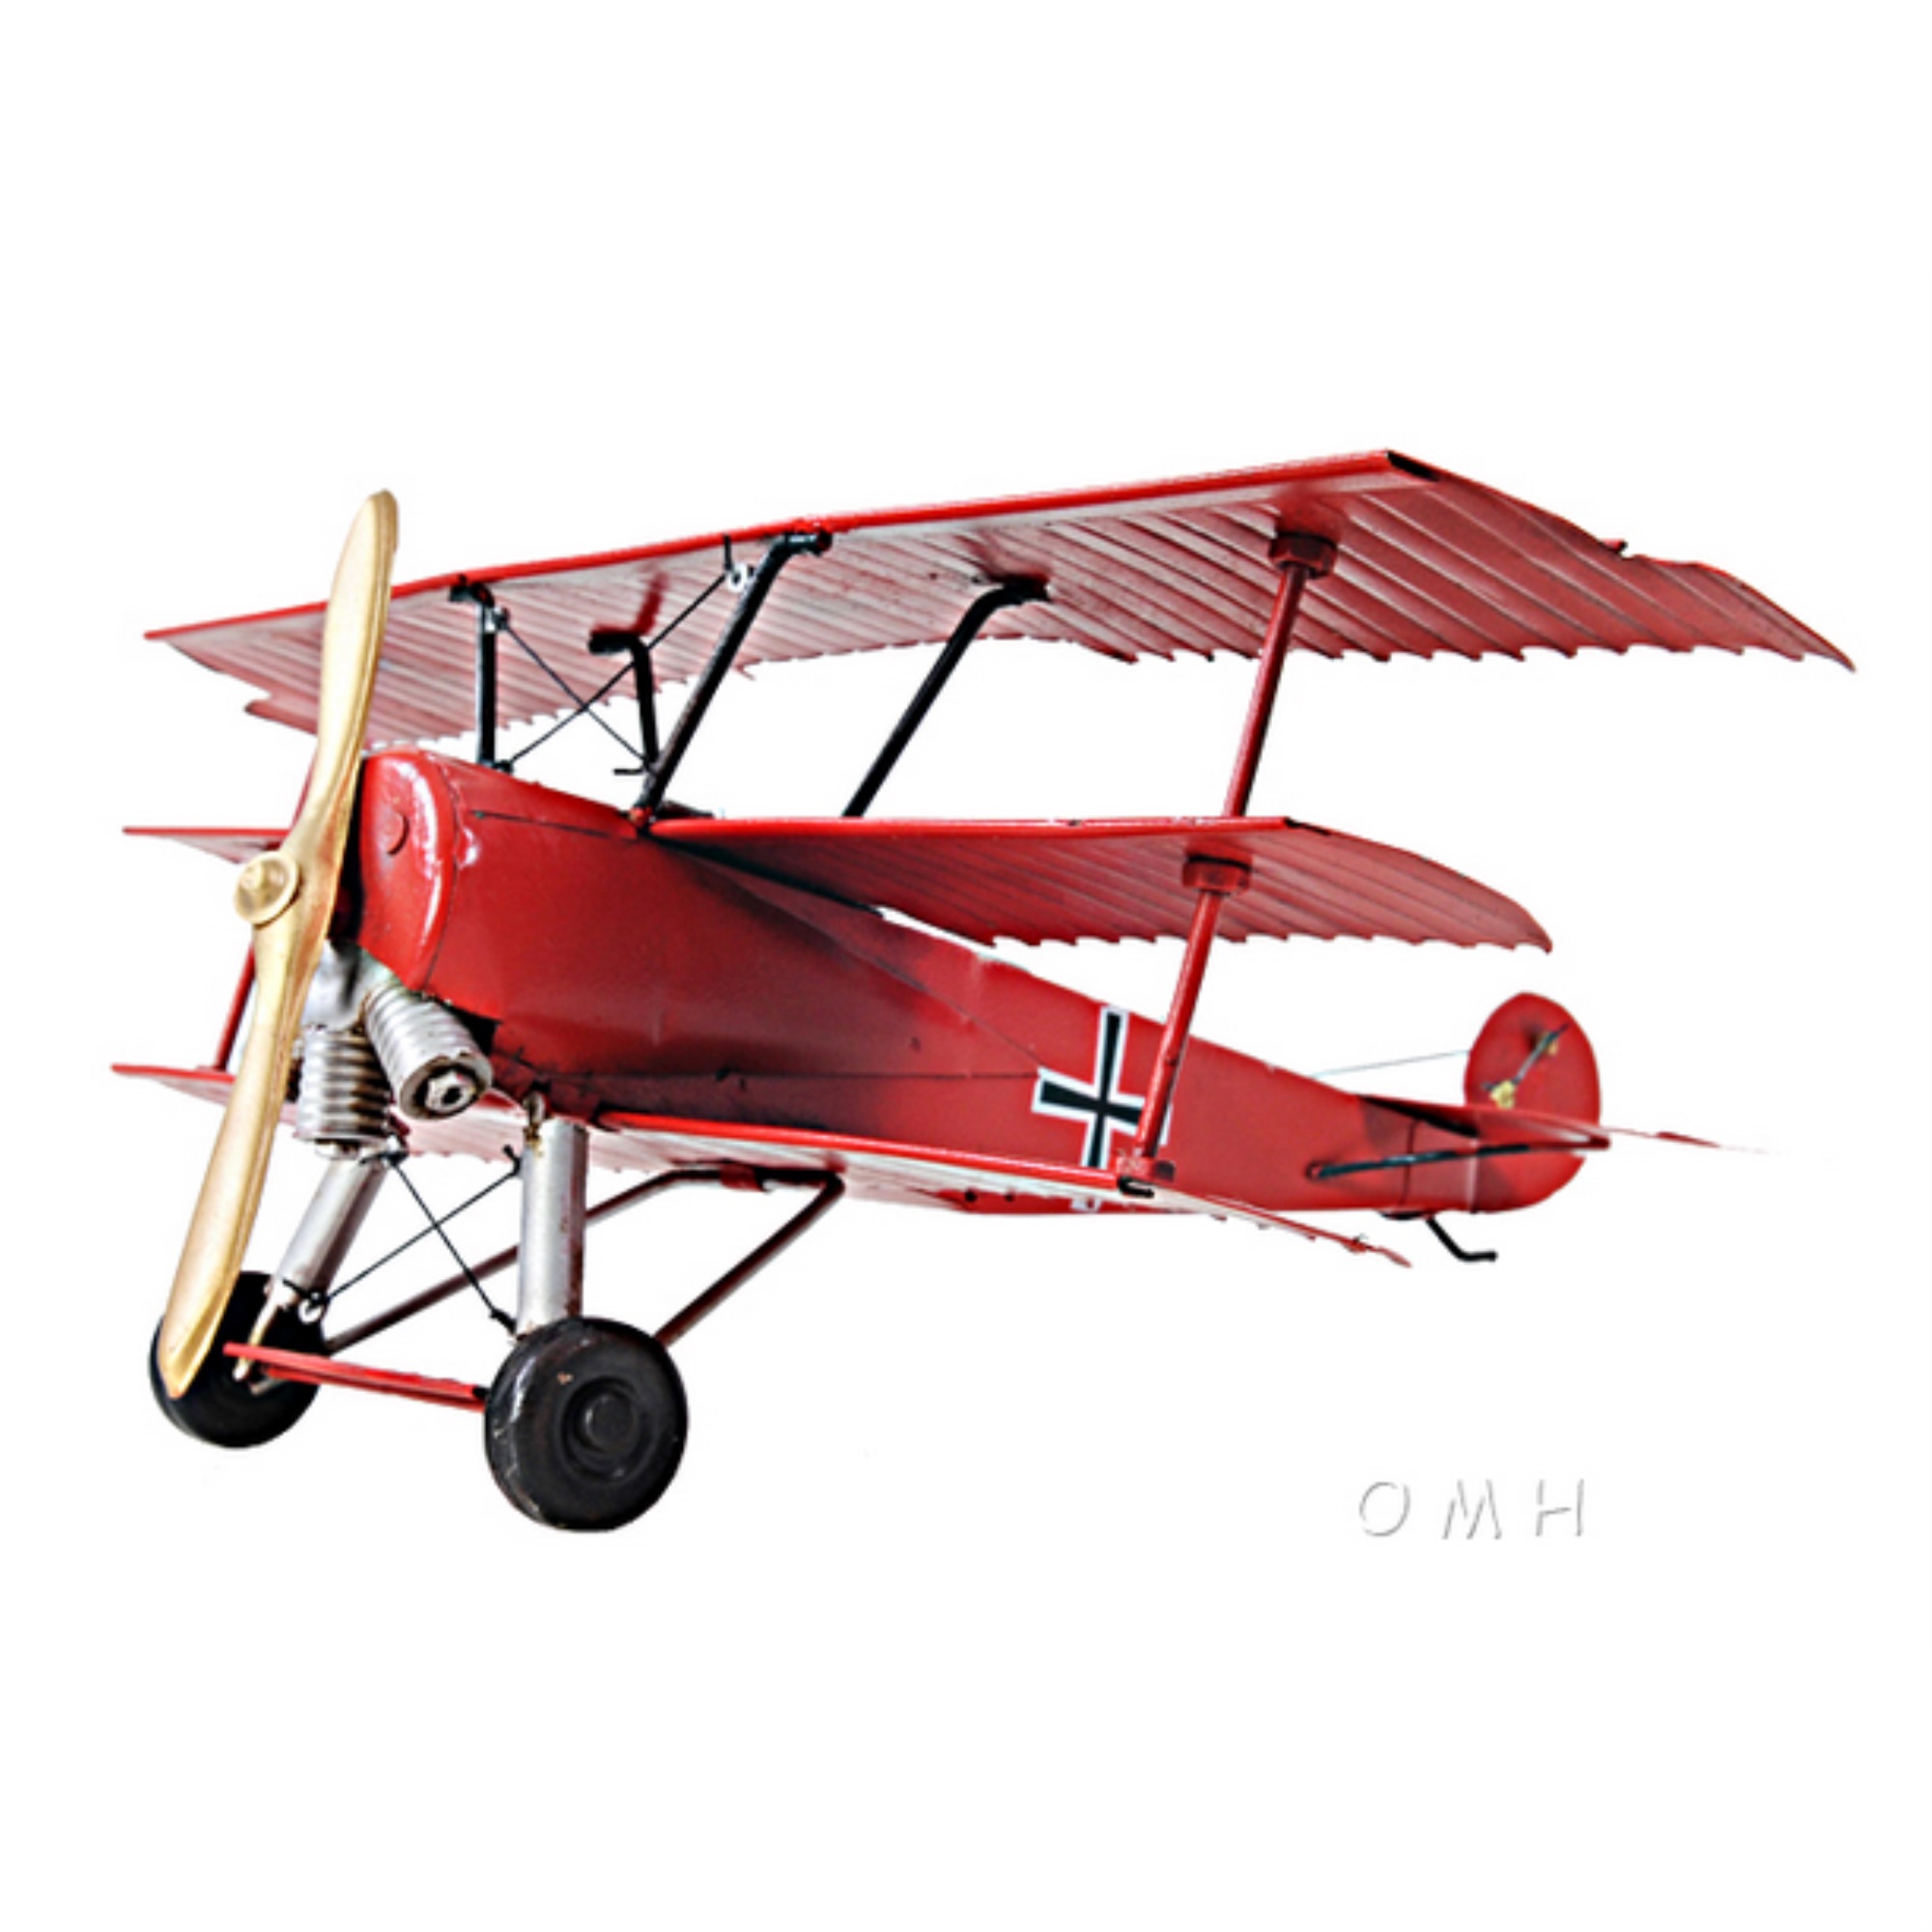 Old Modern Handicrafts Inc (OMH) 1917 Red Baron Fokker Triplane Model Fighter Aircraft- 1:30 Scale